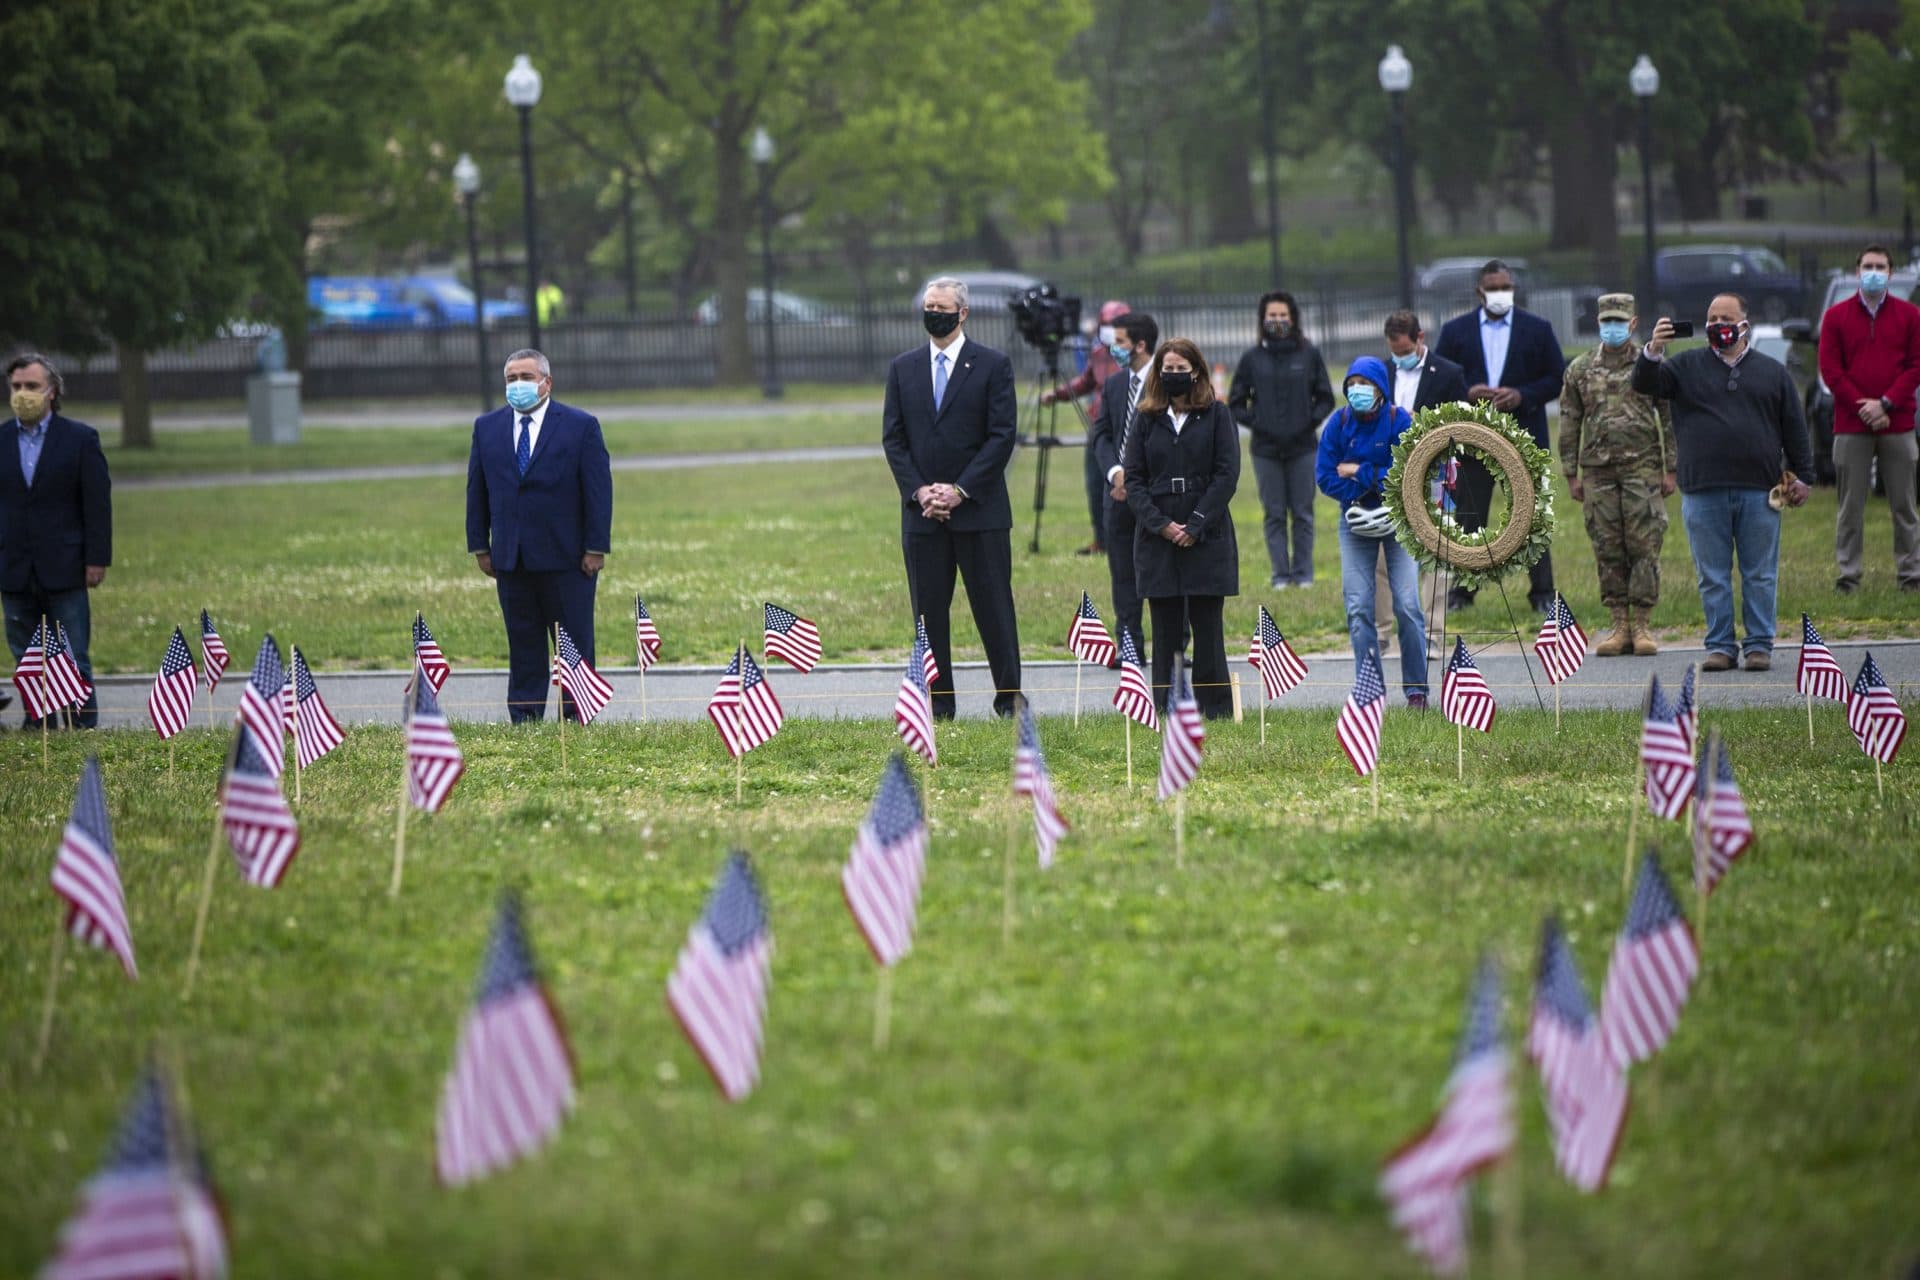 Gov. Charlie Baker and members of the Massachusetts Military Heroes Fund stand during a moment of silence after a wreath was placed in the Boston Common to honor Massachusetts veterans who died during military action. (Jesse Costa/WBUR)